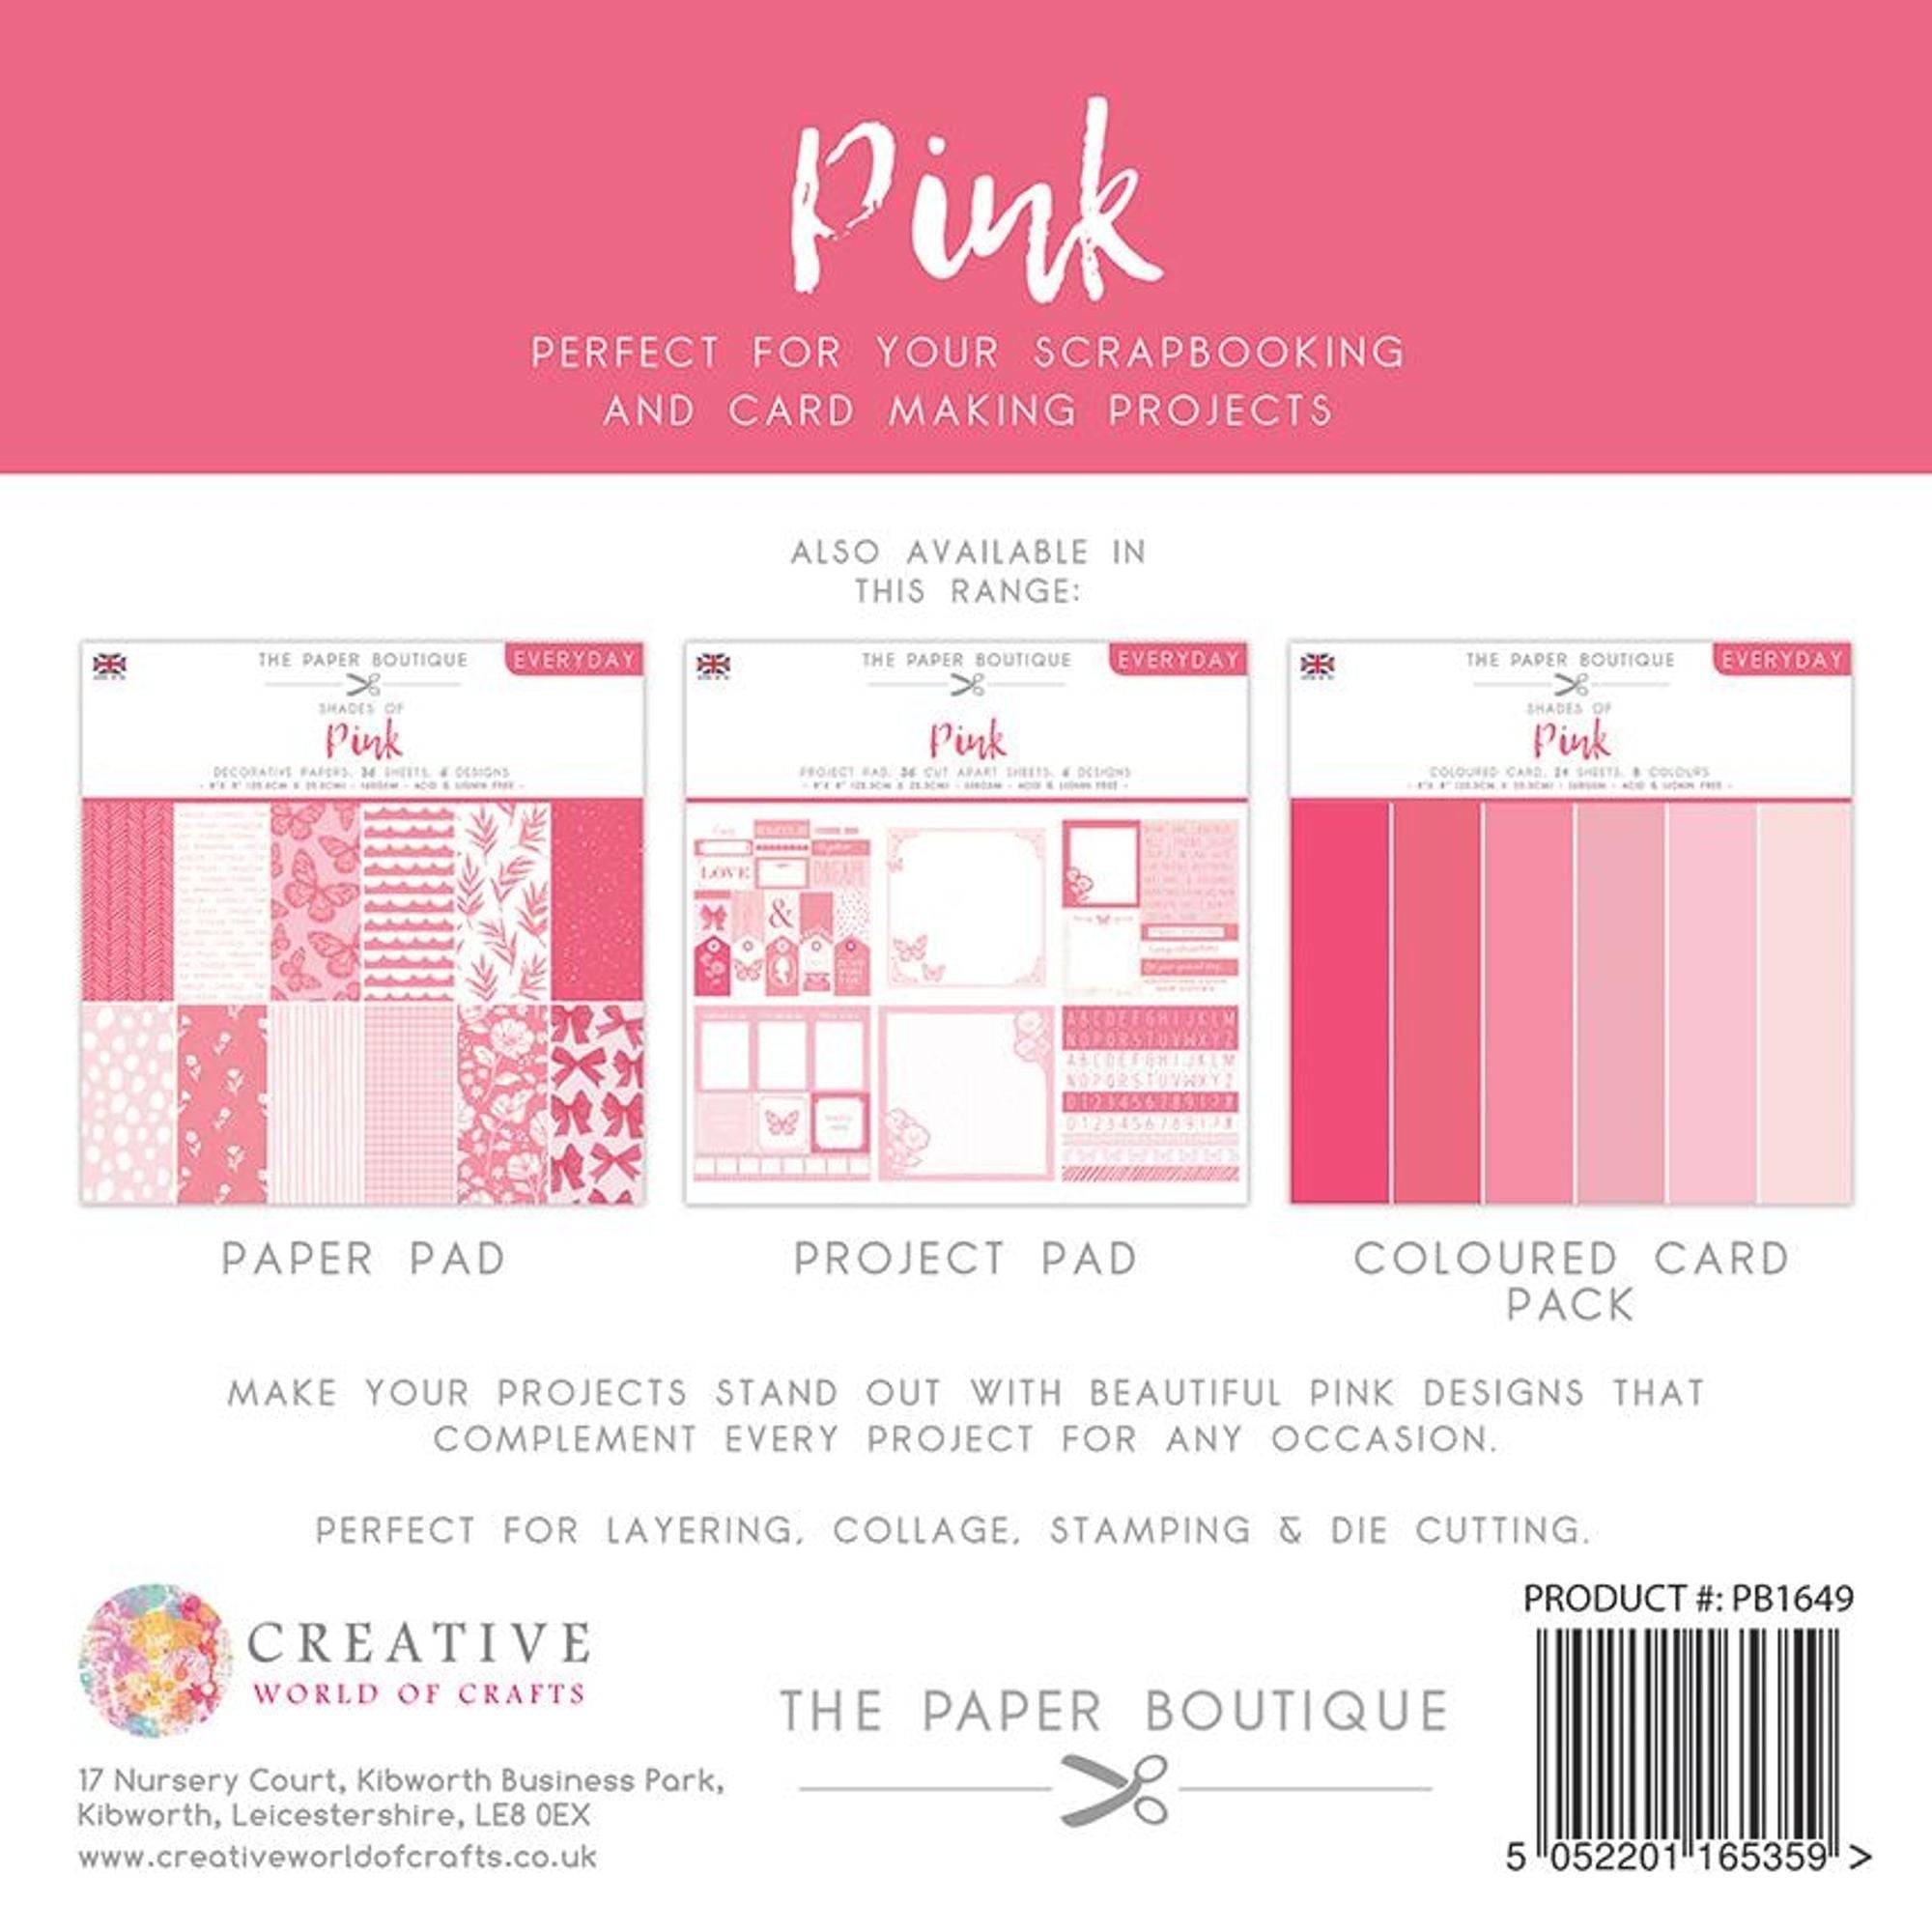 The Paper Boutique Everyday - Shades Of - Pink 8 in x 8 in Project Pad